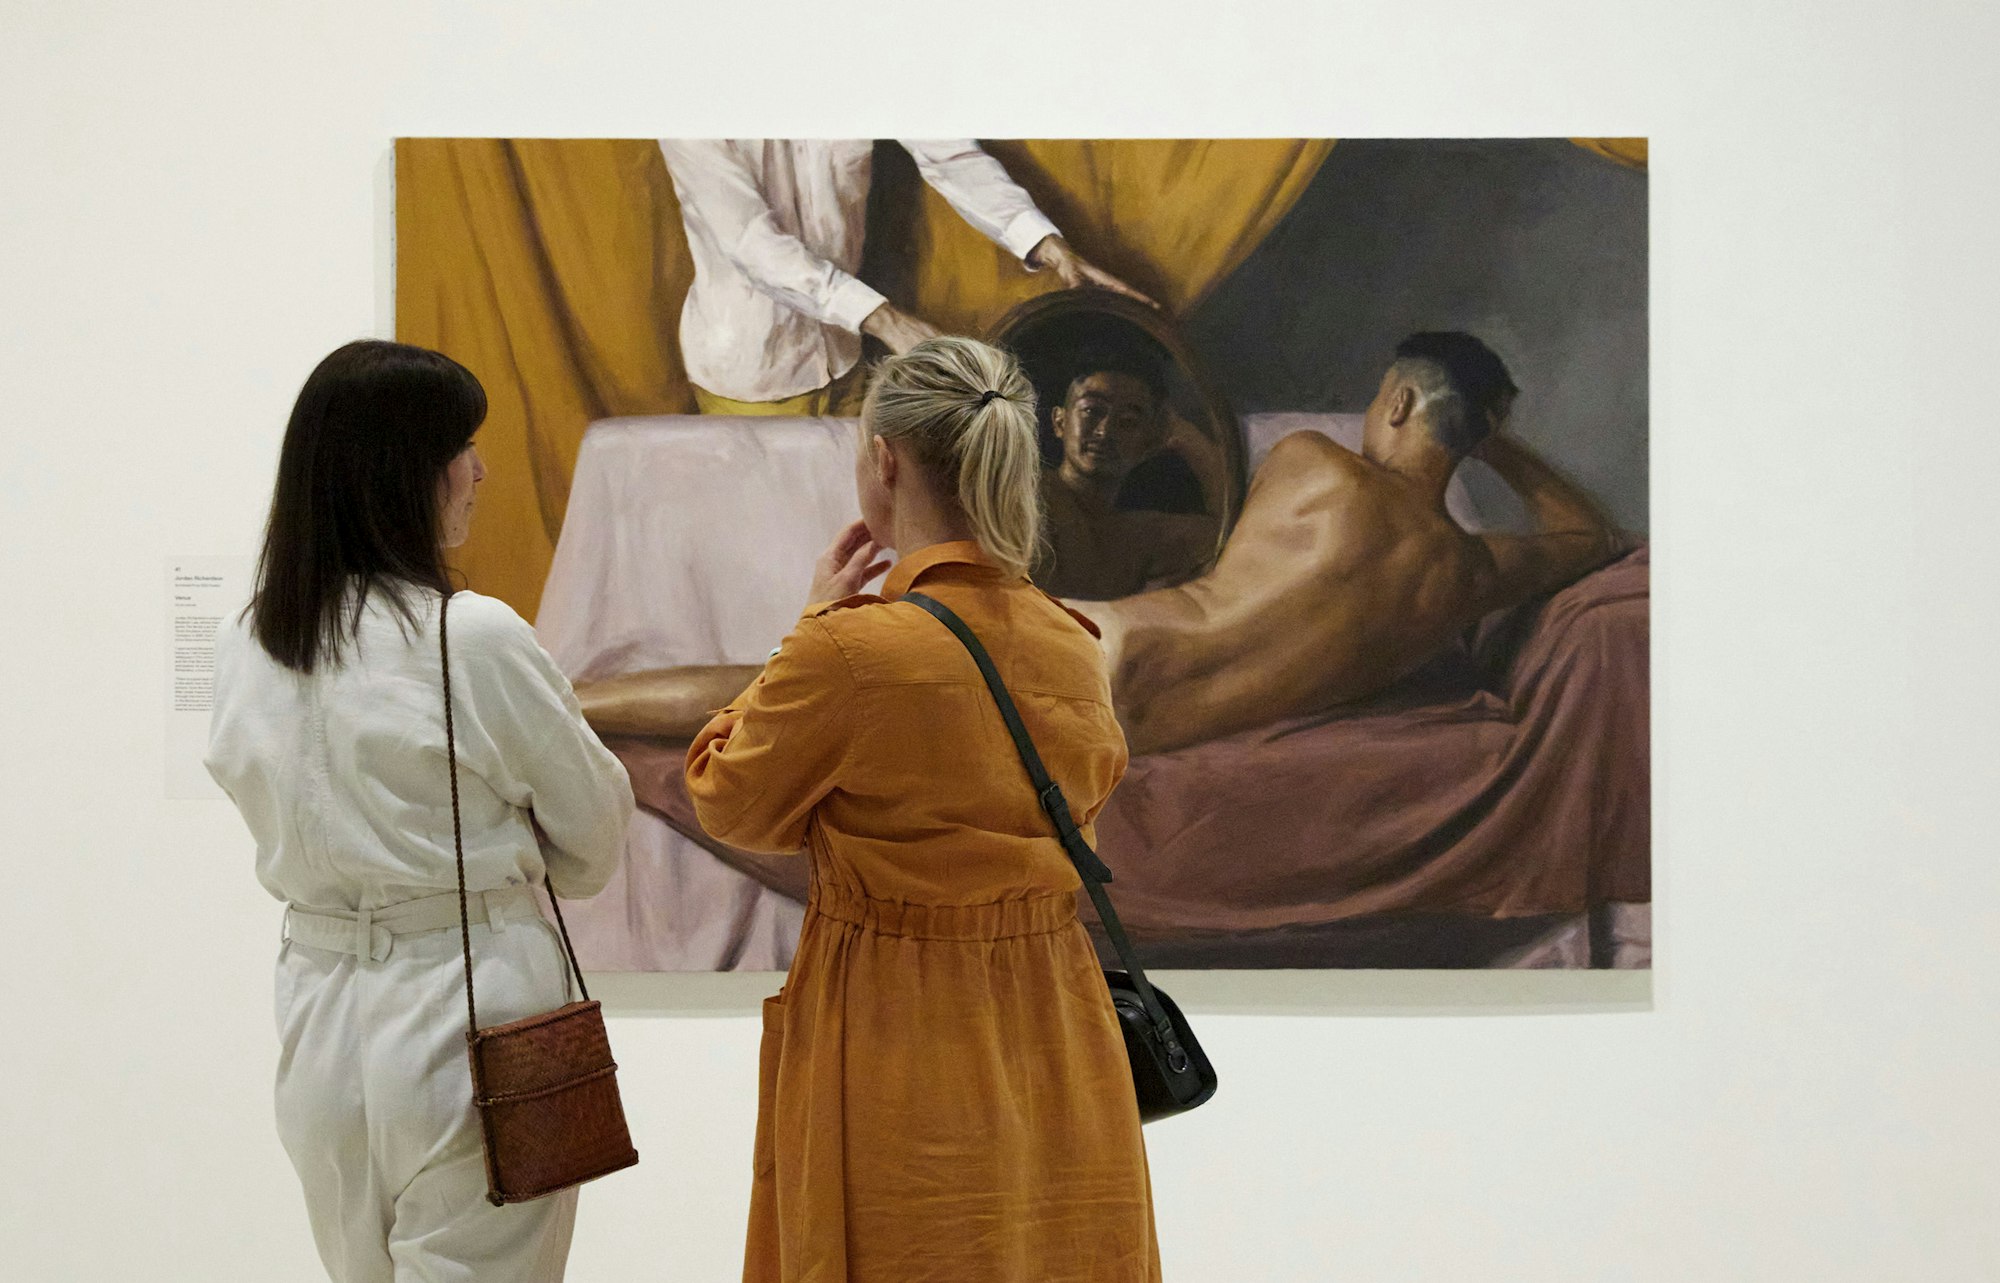 Two people look at a painting of a nude reclining on a sofa